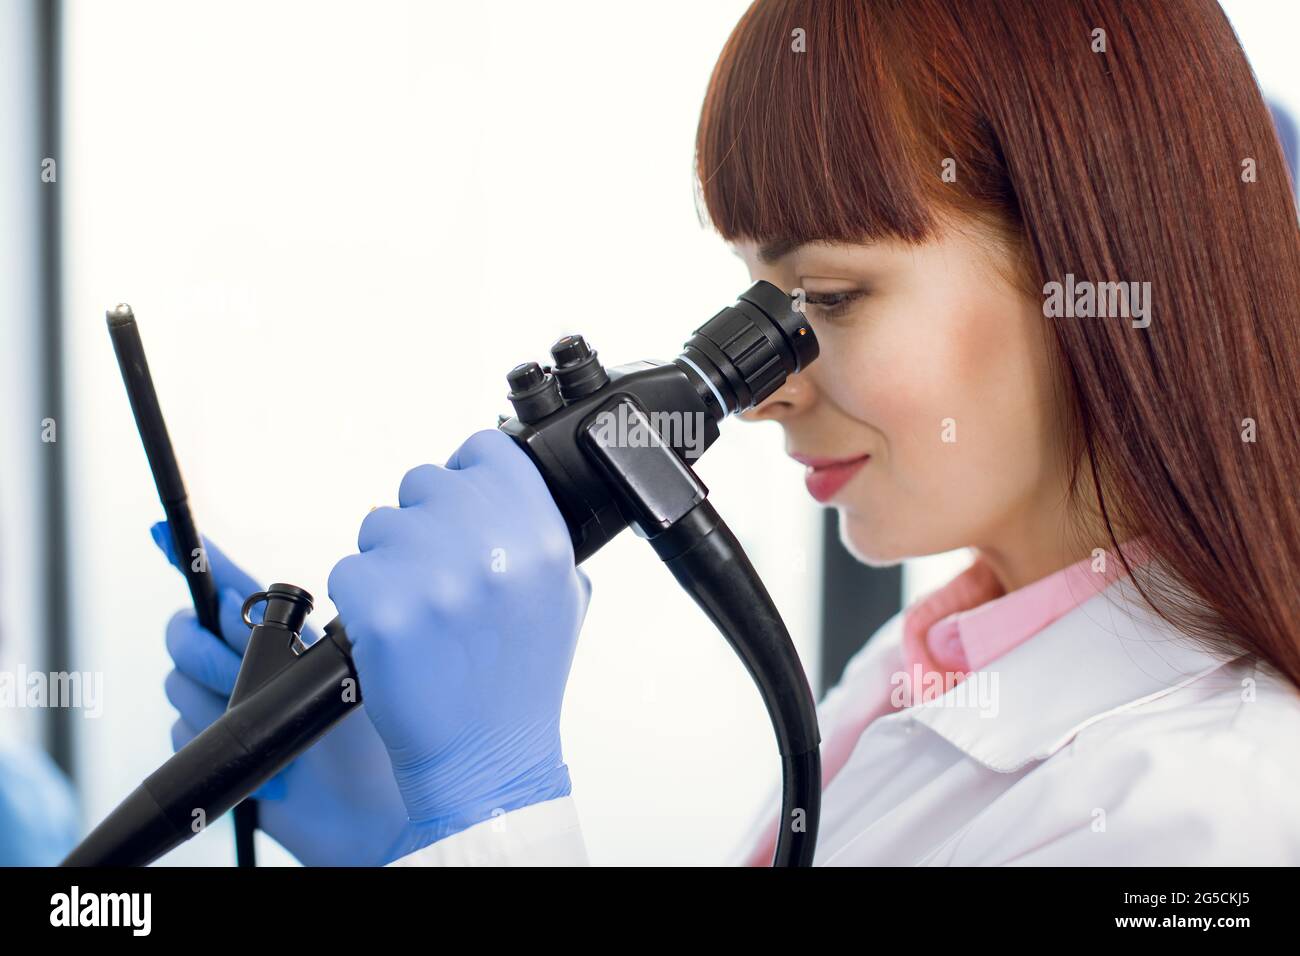 Instrument for endoscopy in the hands of pretty young Caucasian female doctor, performing gastrointestinal fiberoptic endoscopy. Close up portrait. Stock Photo